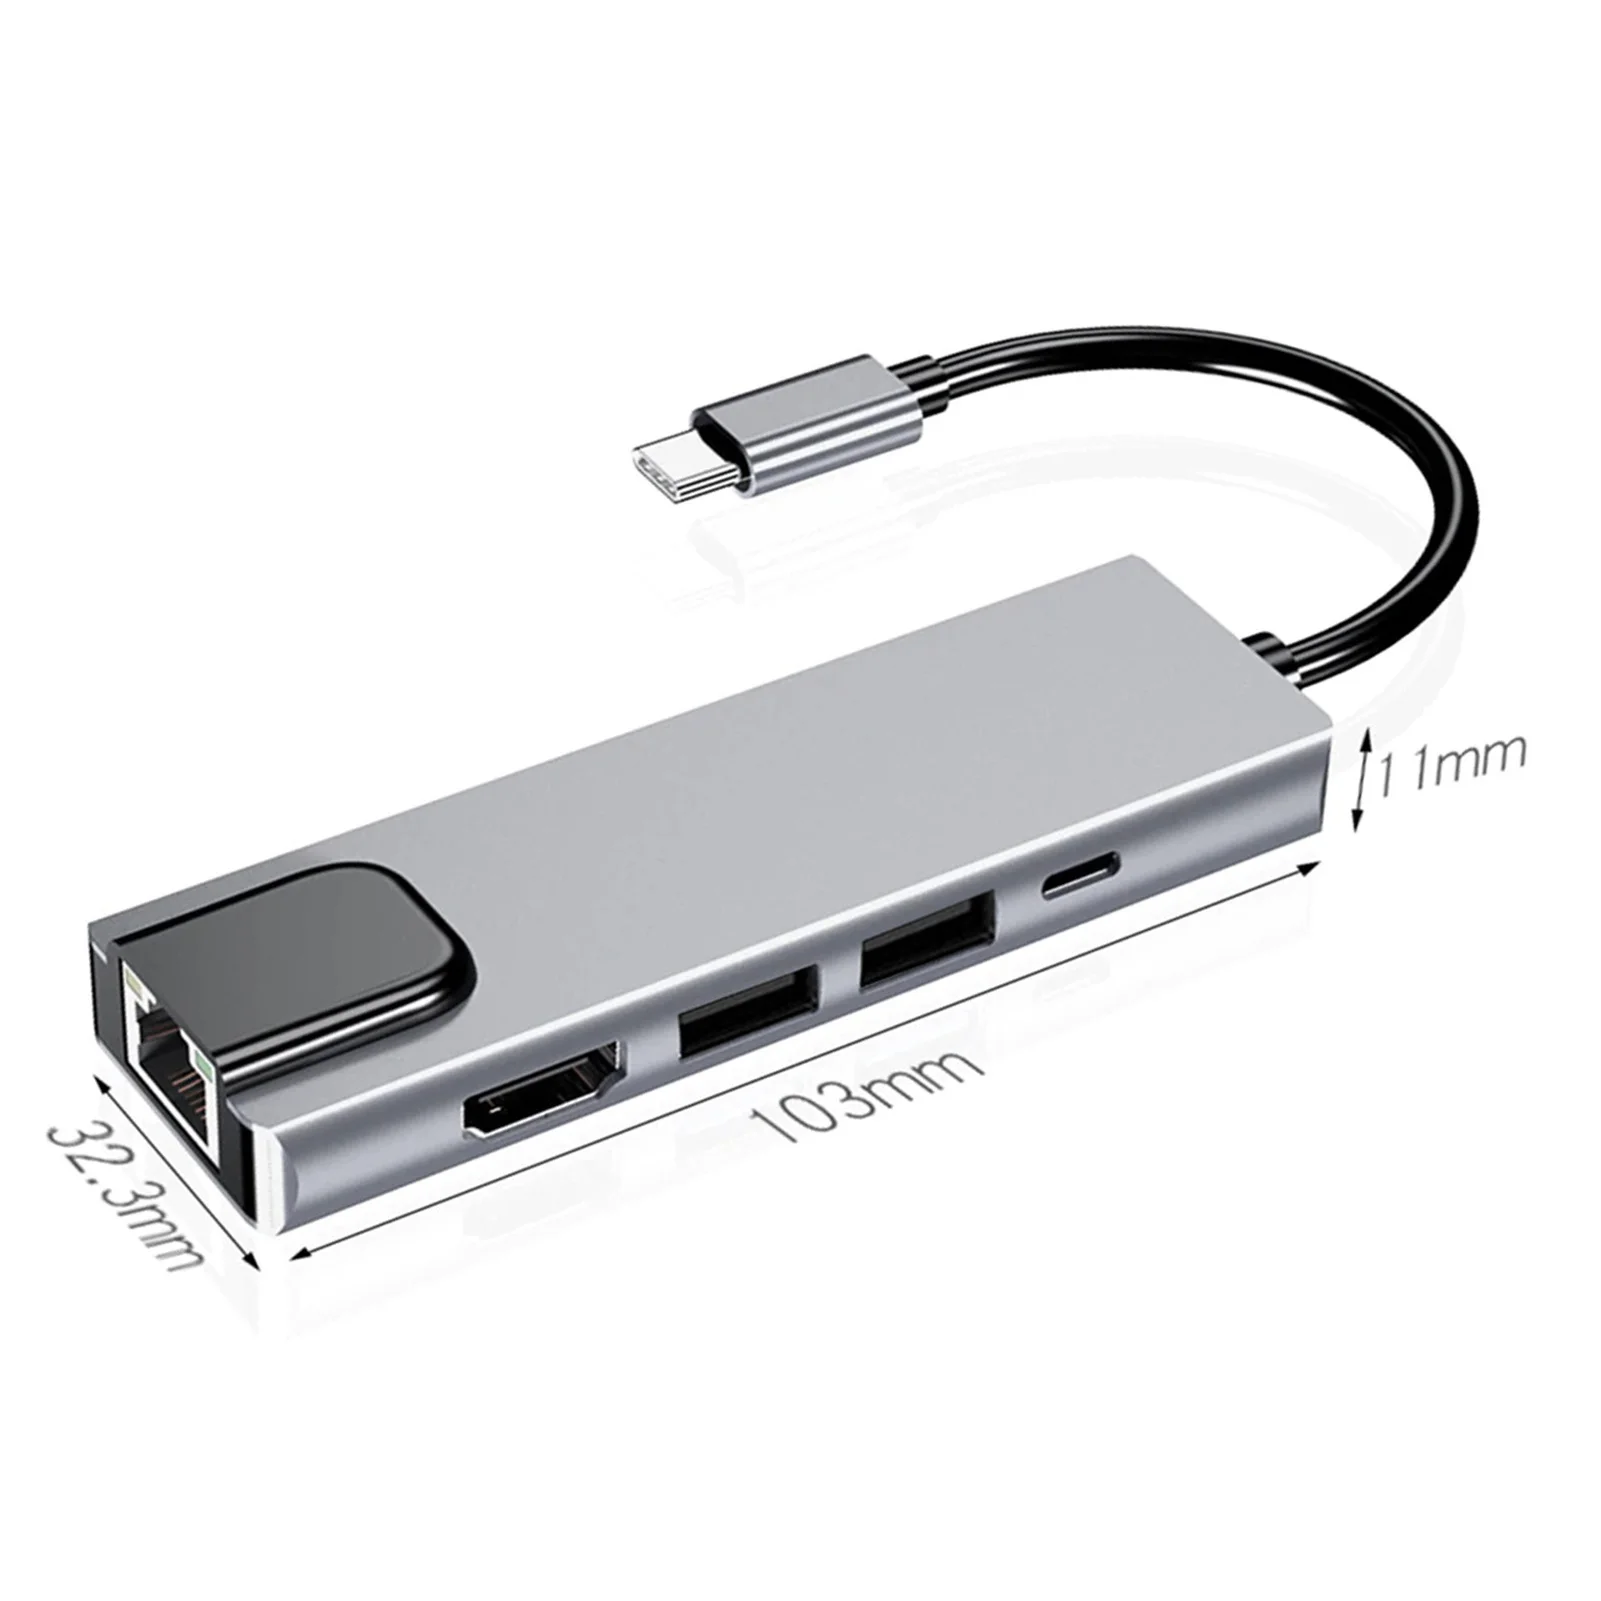 

5 in 1 Type c Adapter USB C to Hub Rj45 USB3.0 Type c Docking station for Mac book Pro Thunderbolt 3 USB-C Charger PD